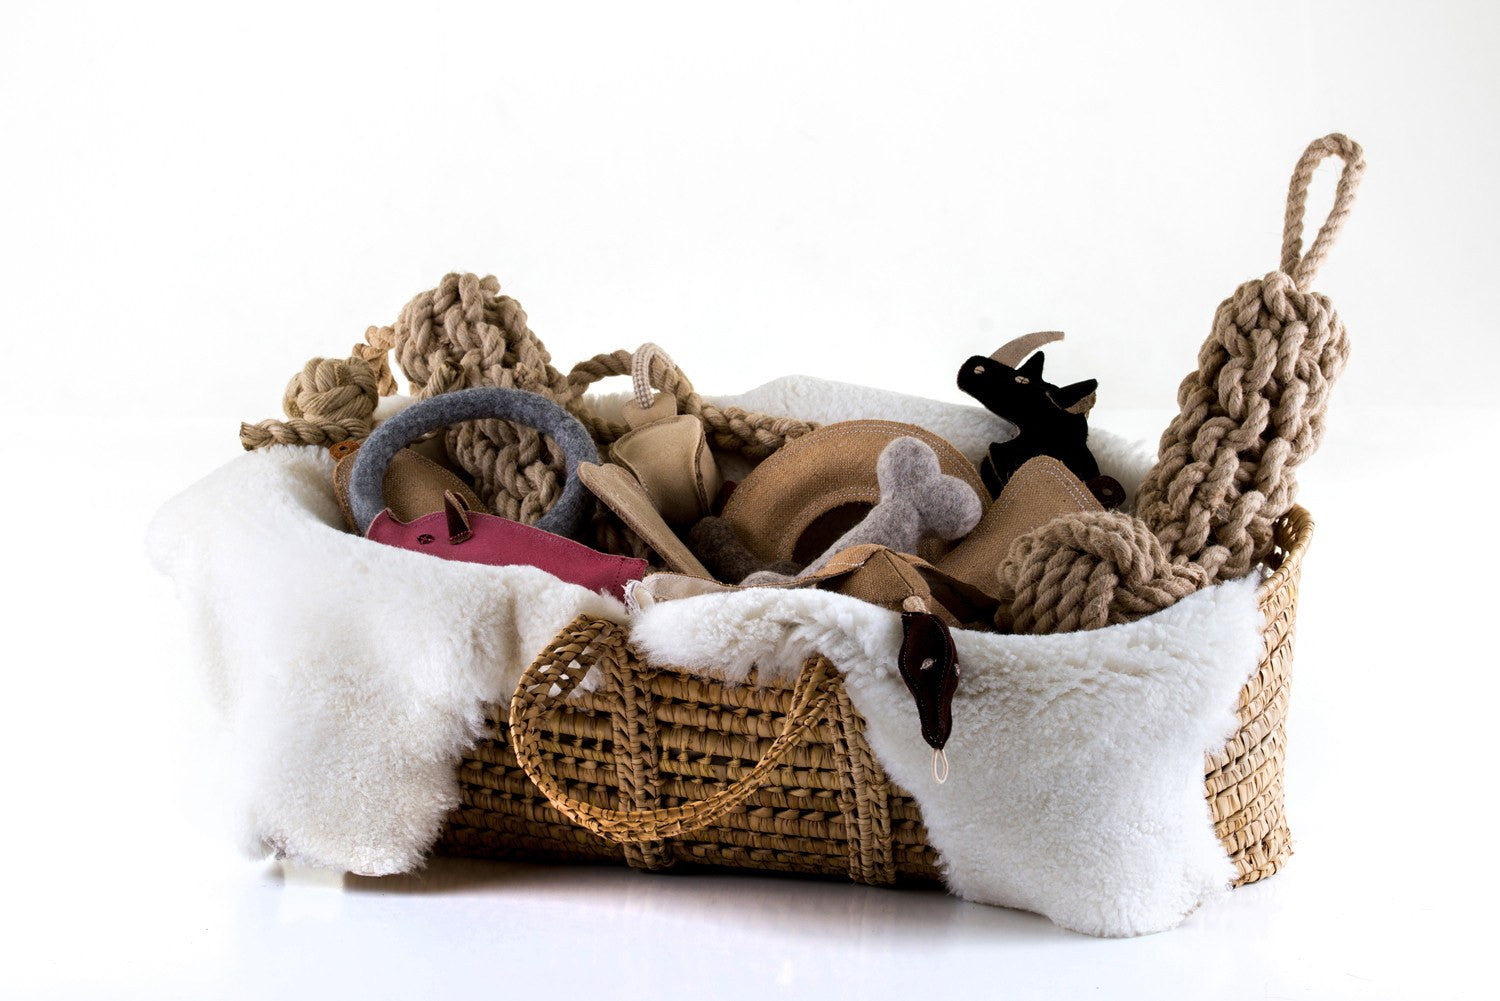 Hand made raffia dog toy basket filled with toys and a sheepskin